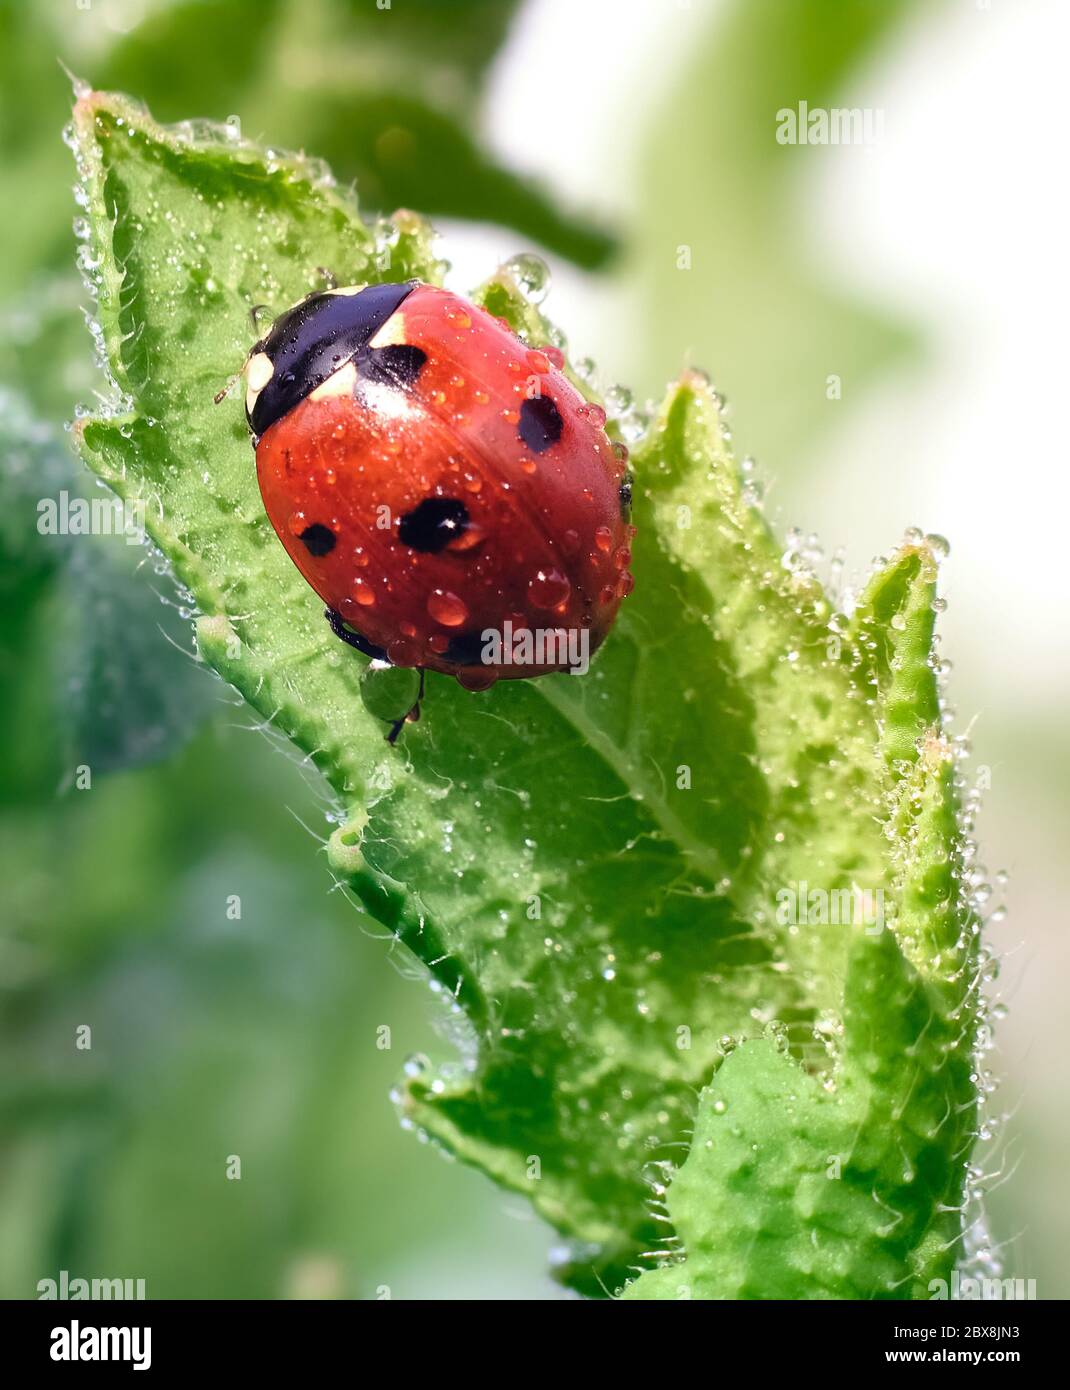 Fresh morning in the garden. Ladybug and dew droplets on a green ...